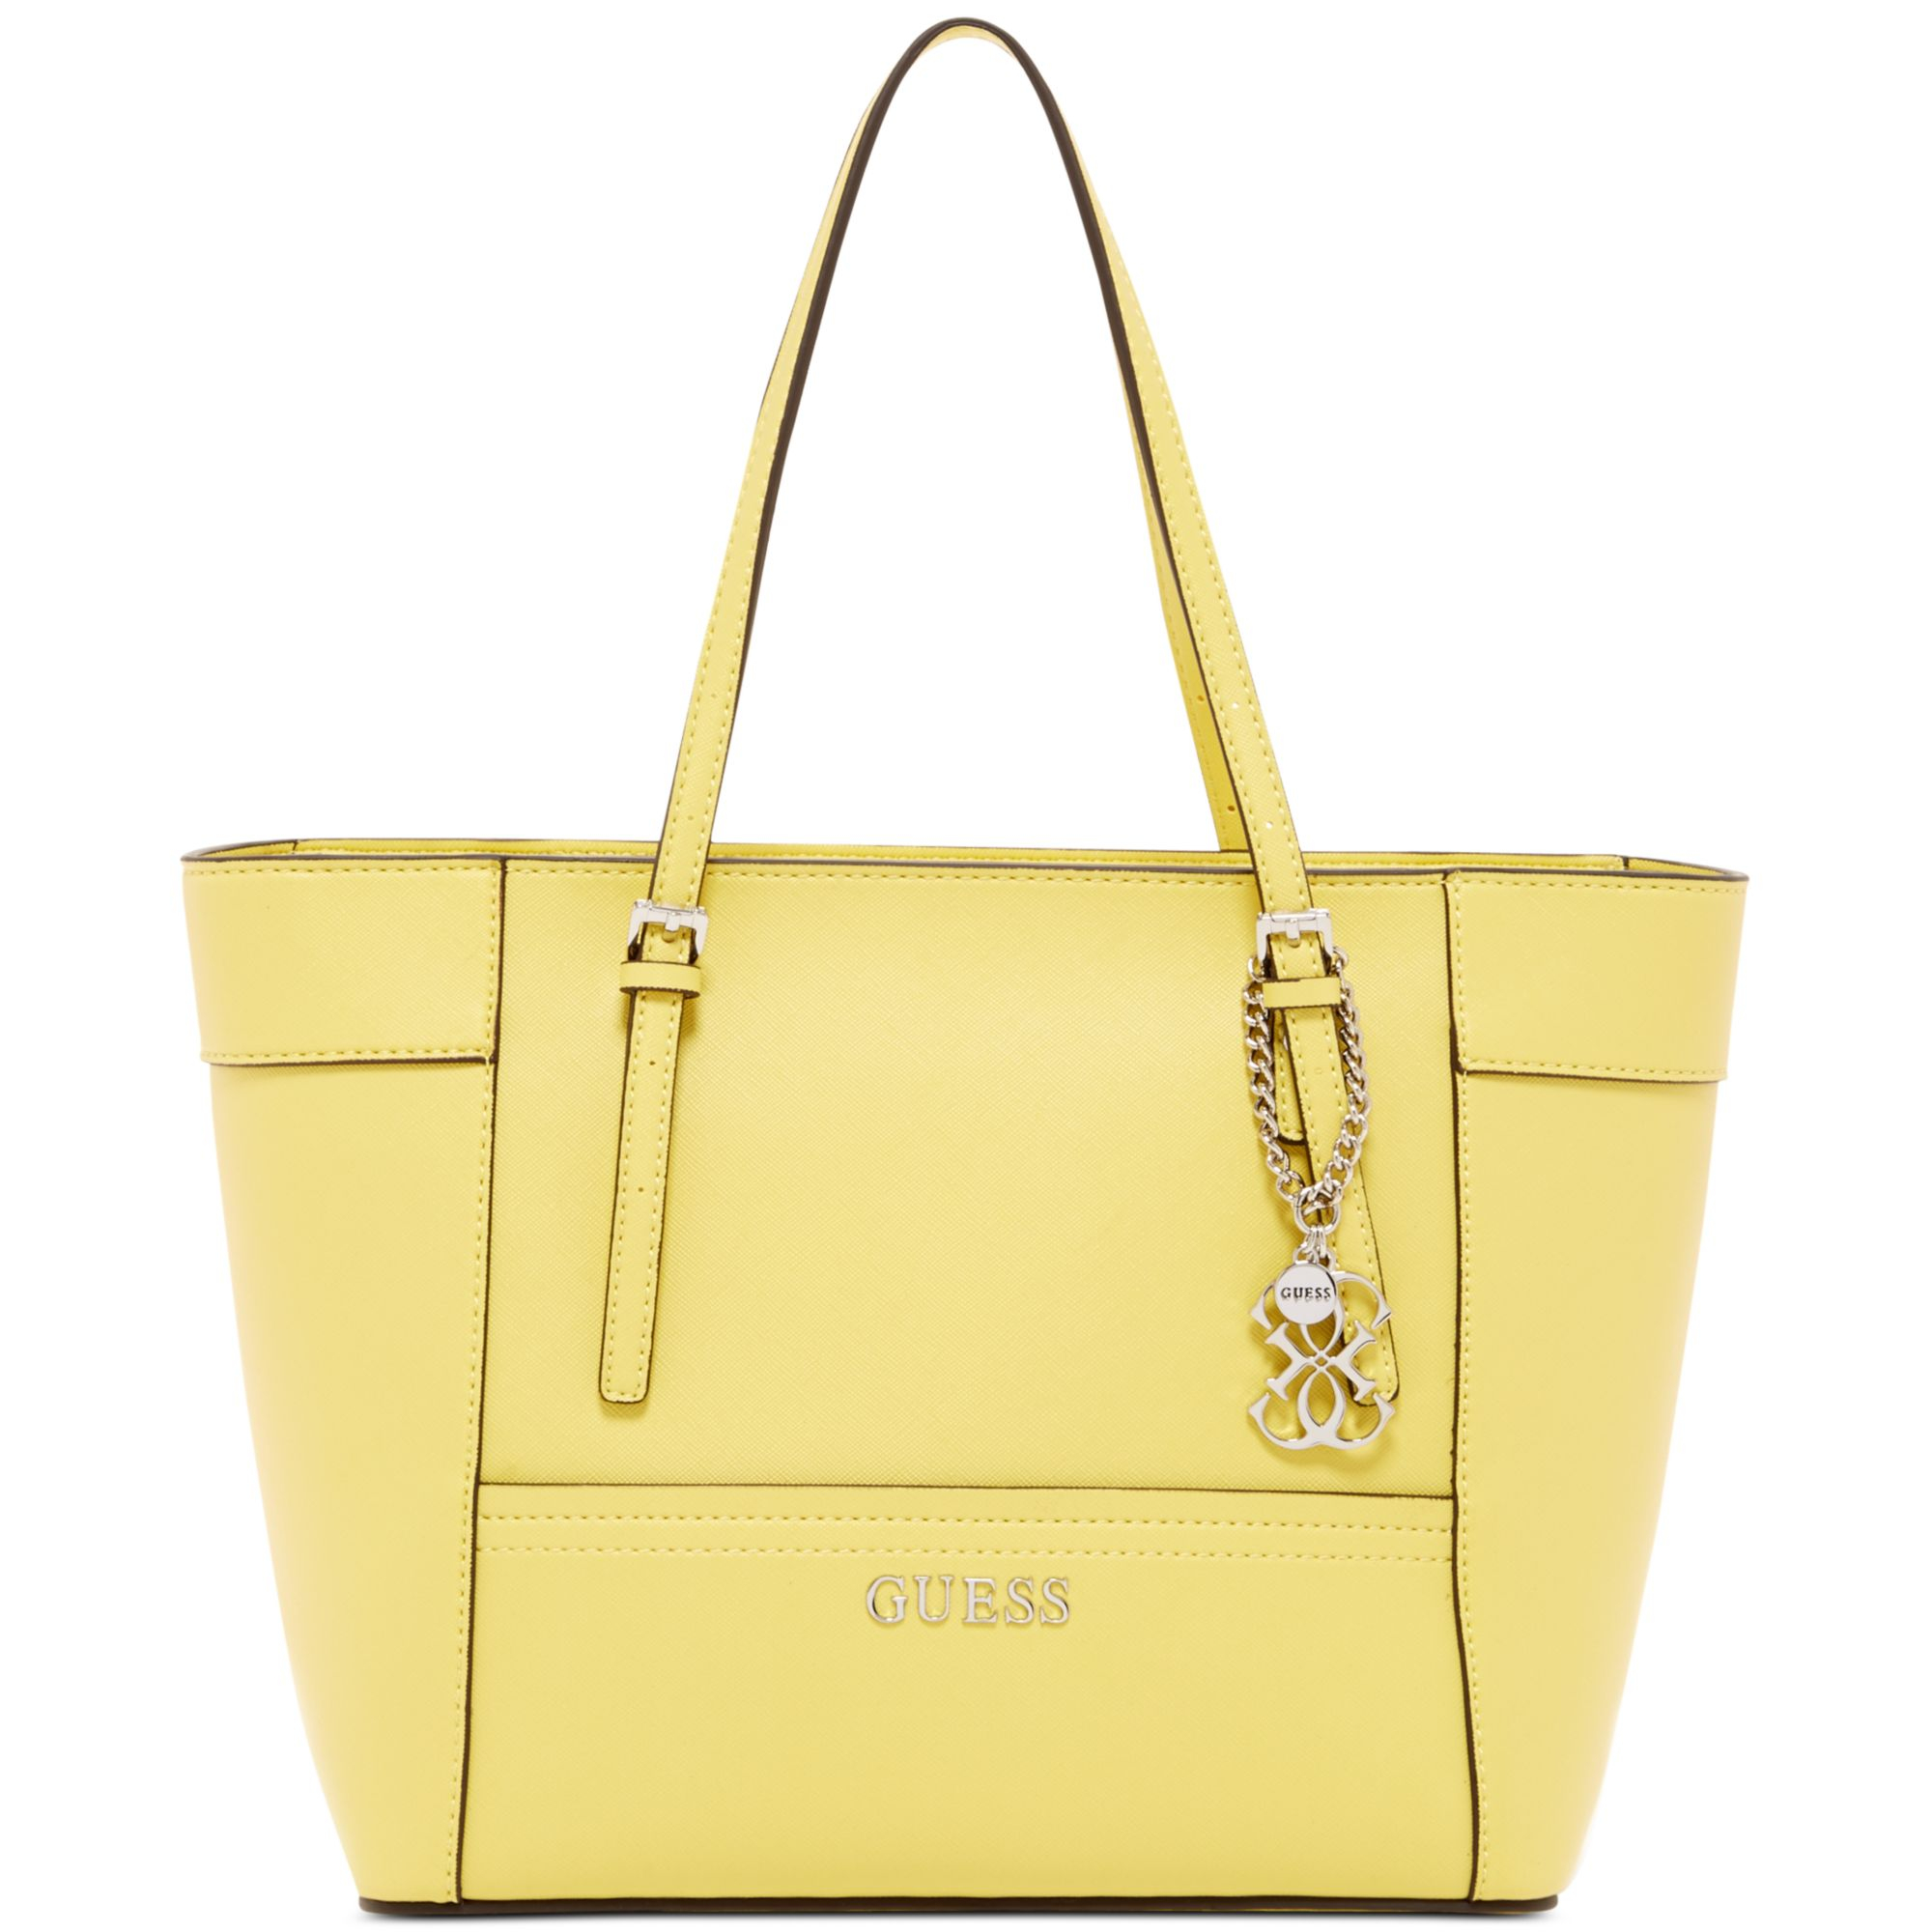 Guess Delaney Small Classic Tote in Lemon (Yellow) | Lyst